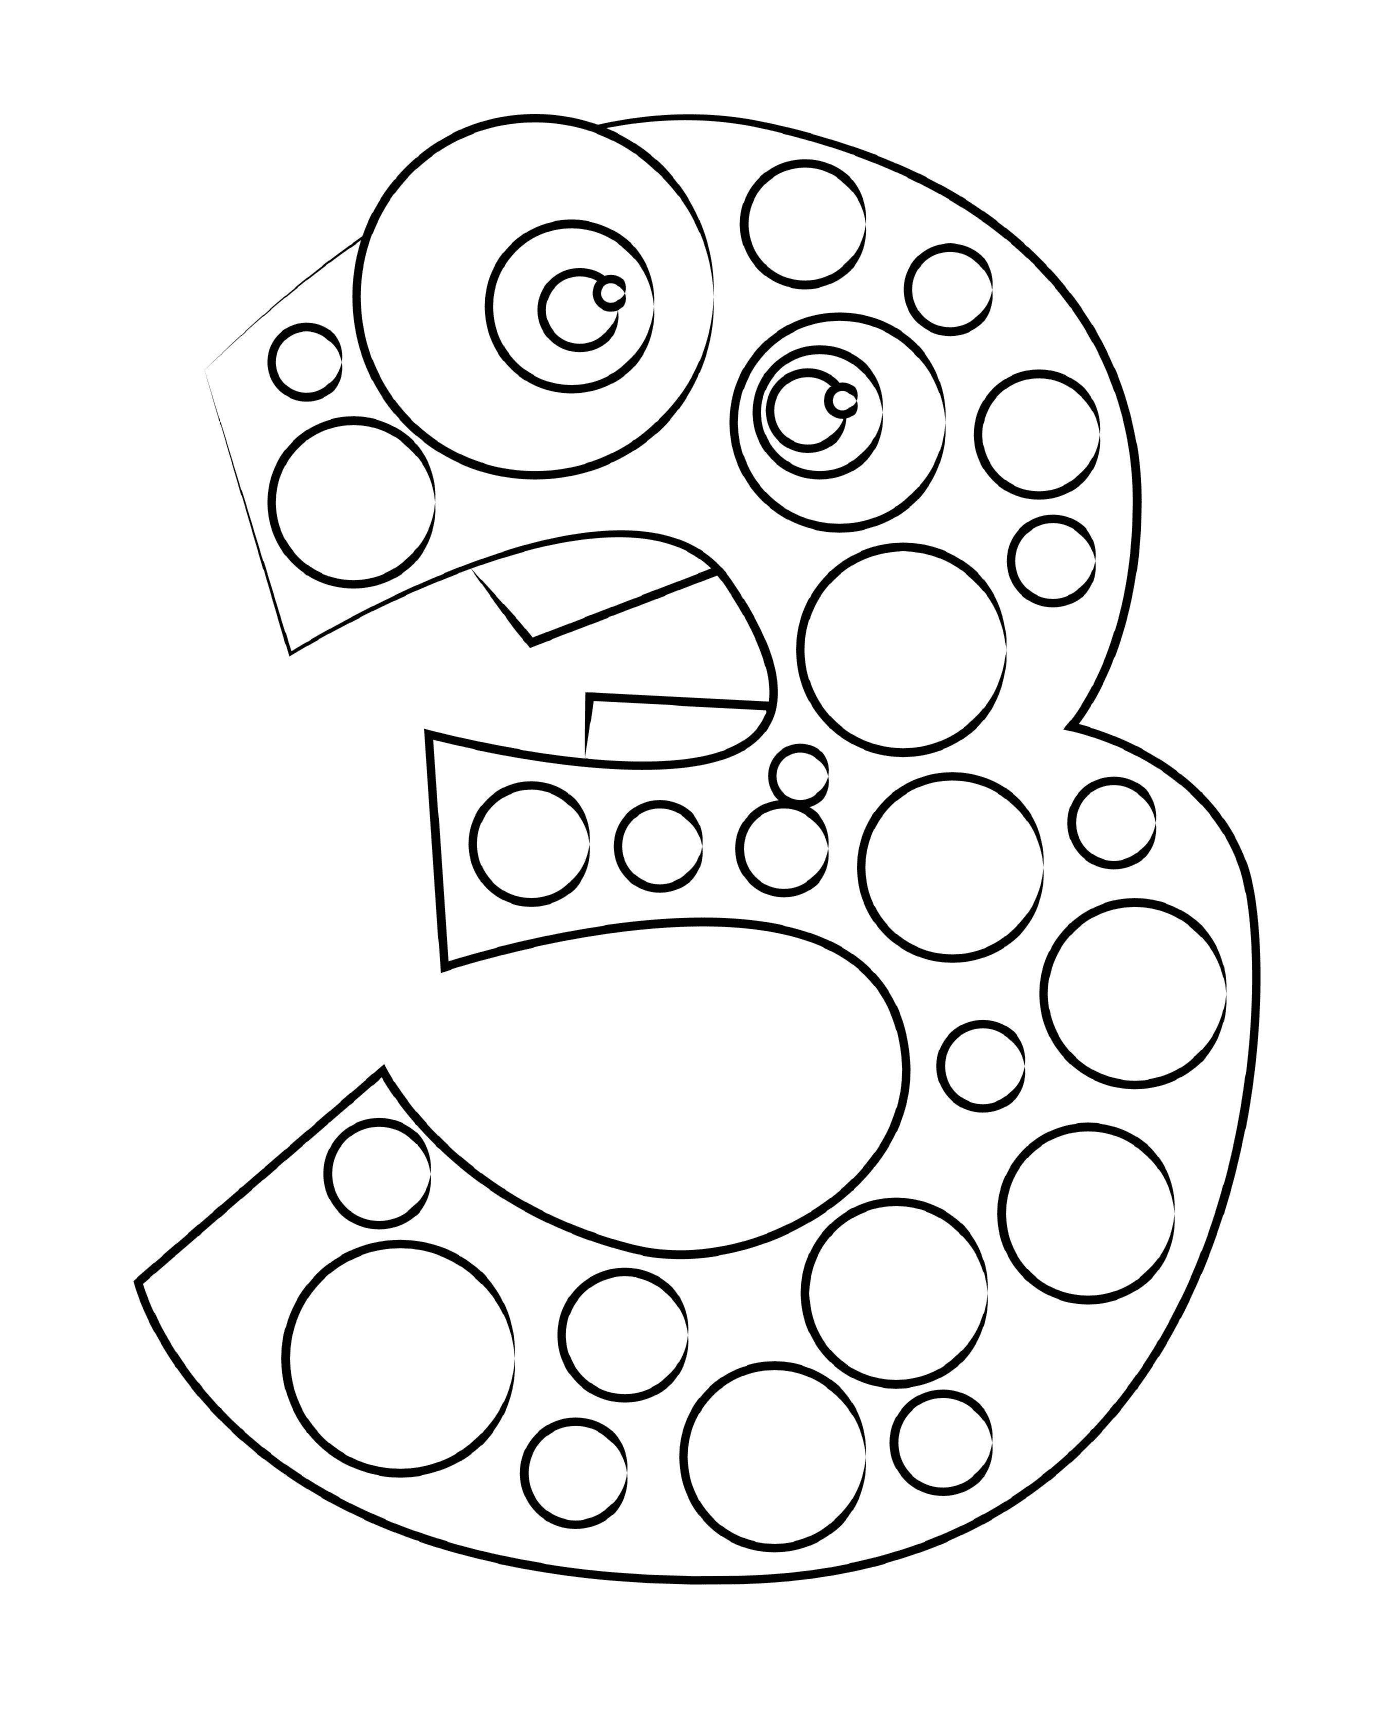  Number three composed of circles 